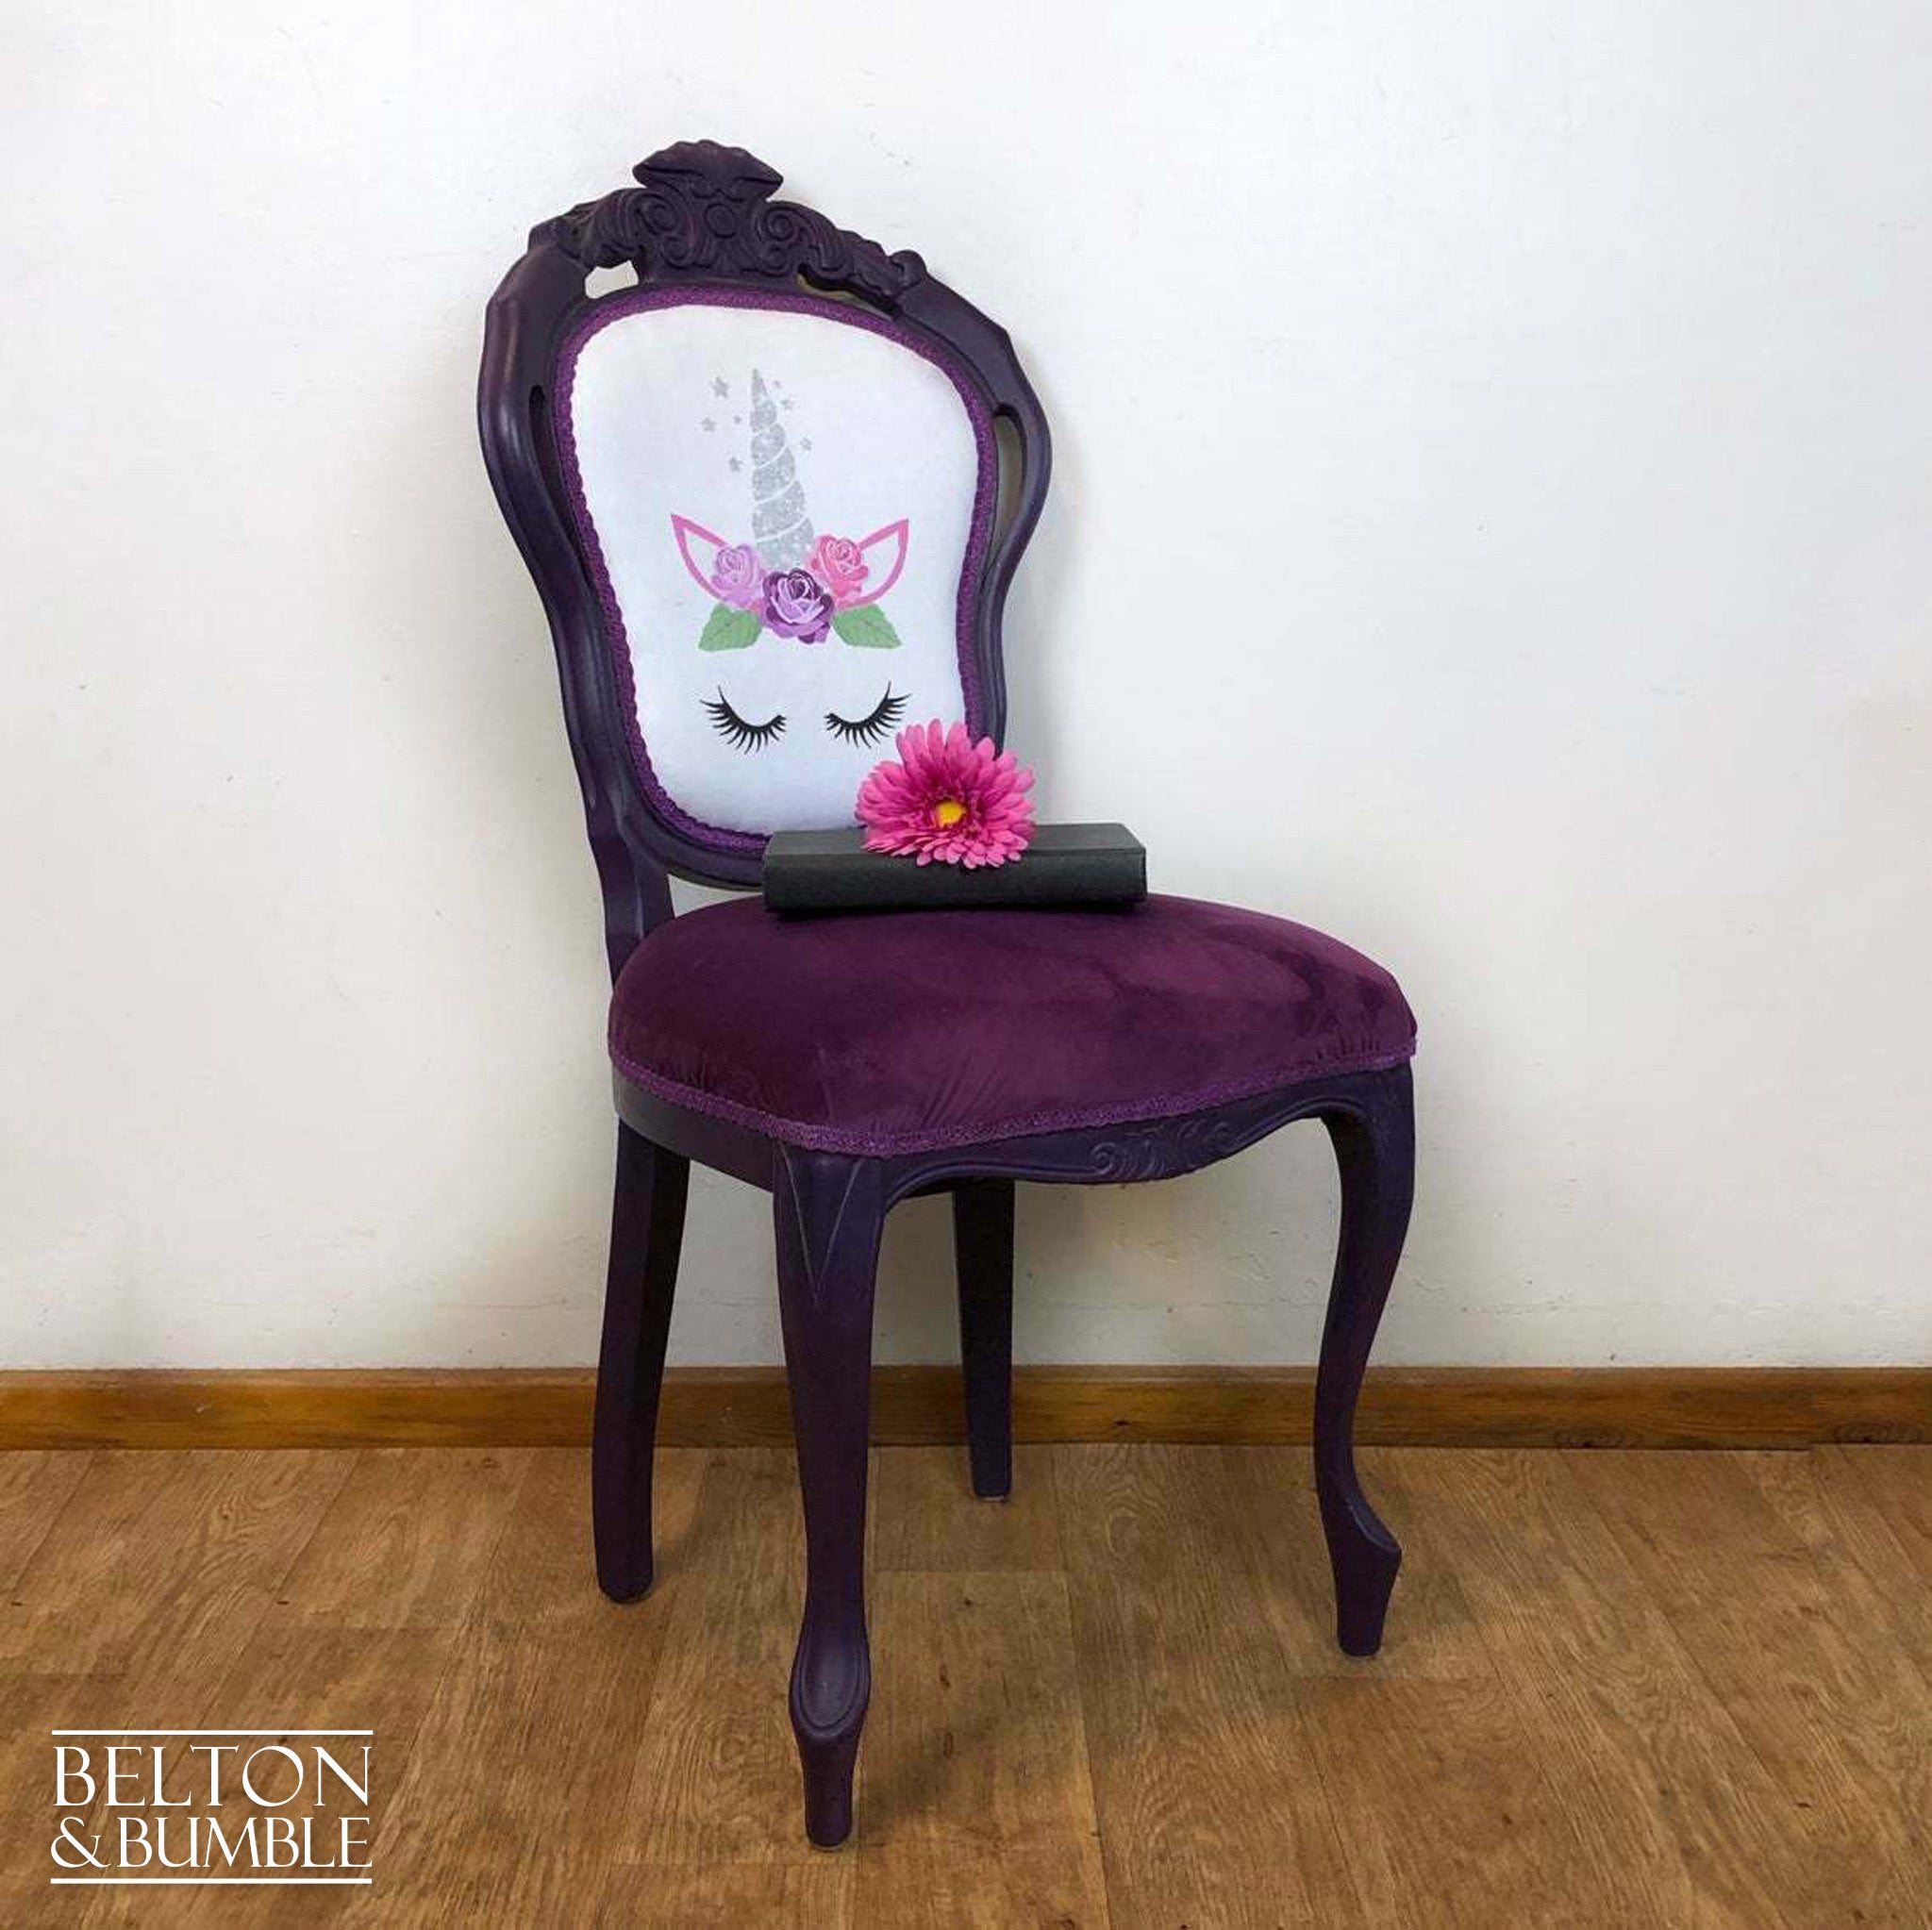 Carved Chair in Purple with Unicorn Print-Belton & Butler